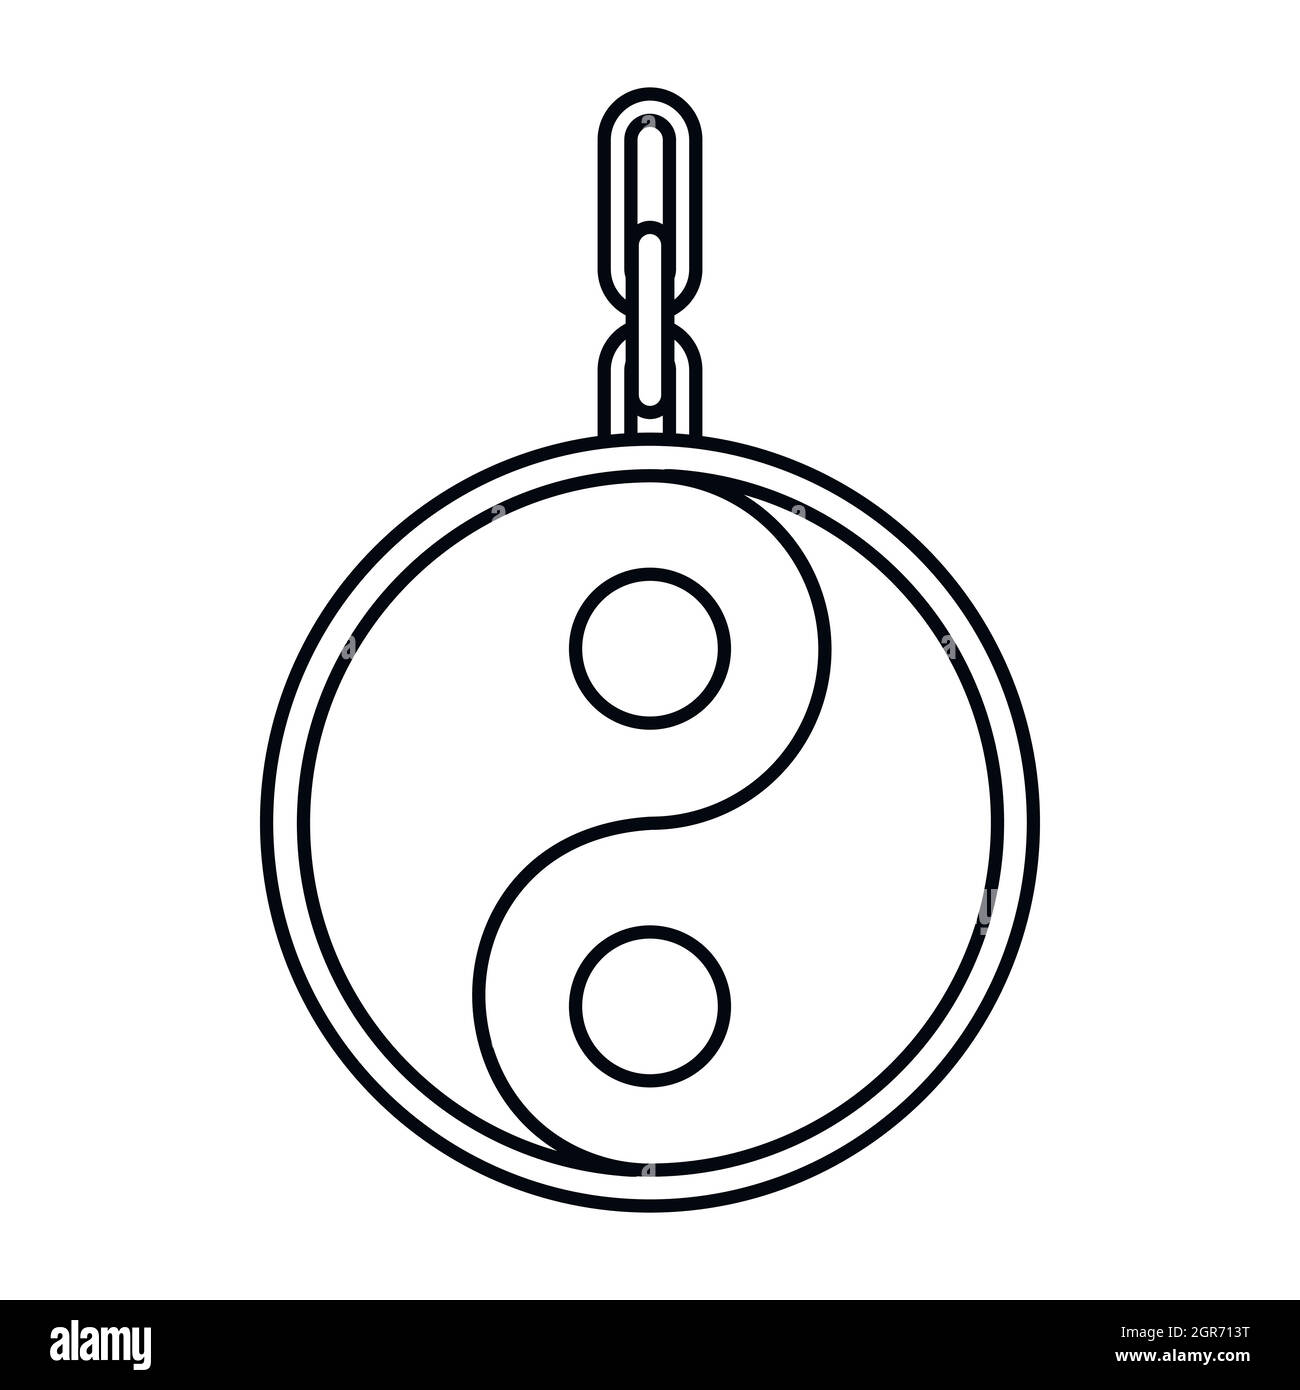 Ying yang symbol of harmony icon, outline style Stock Vector